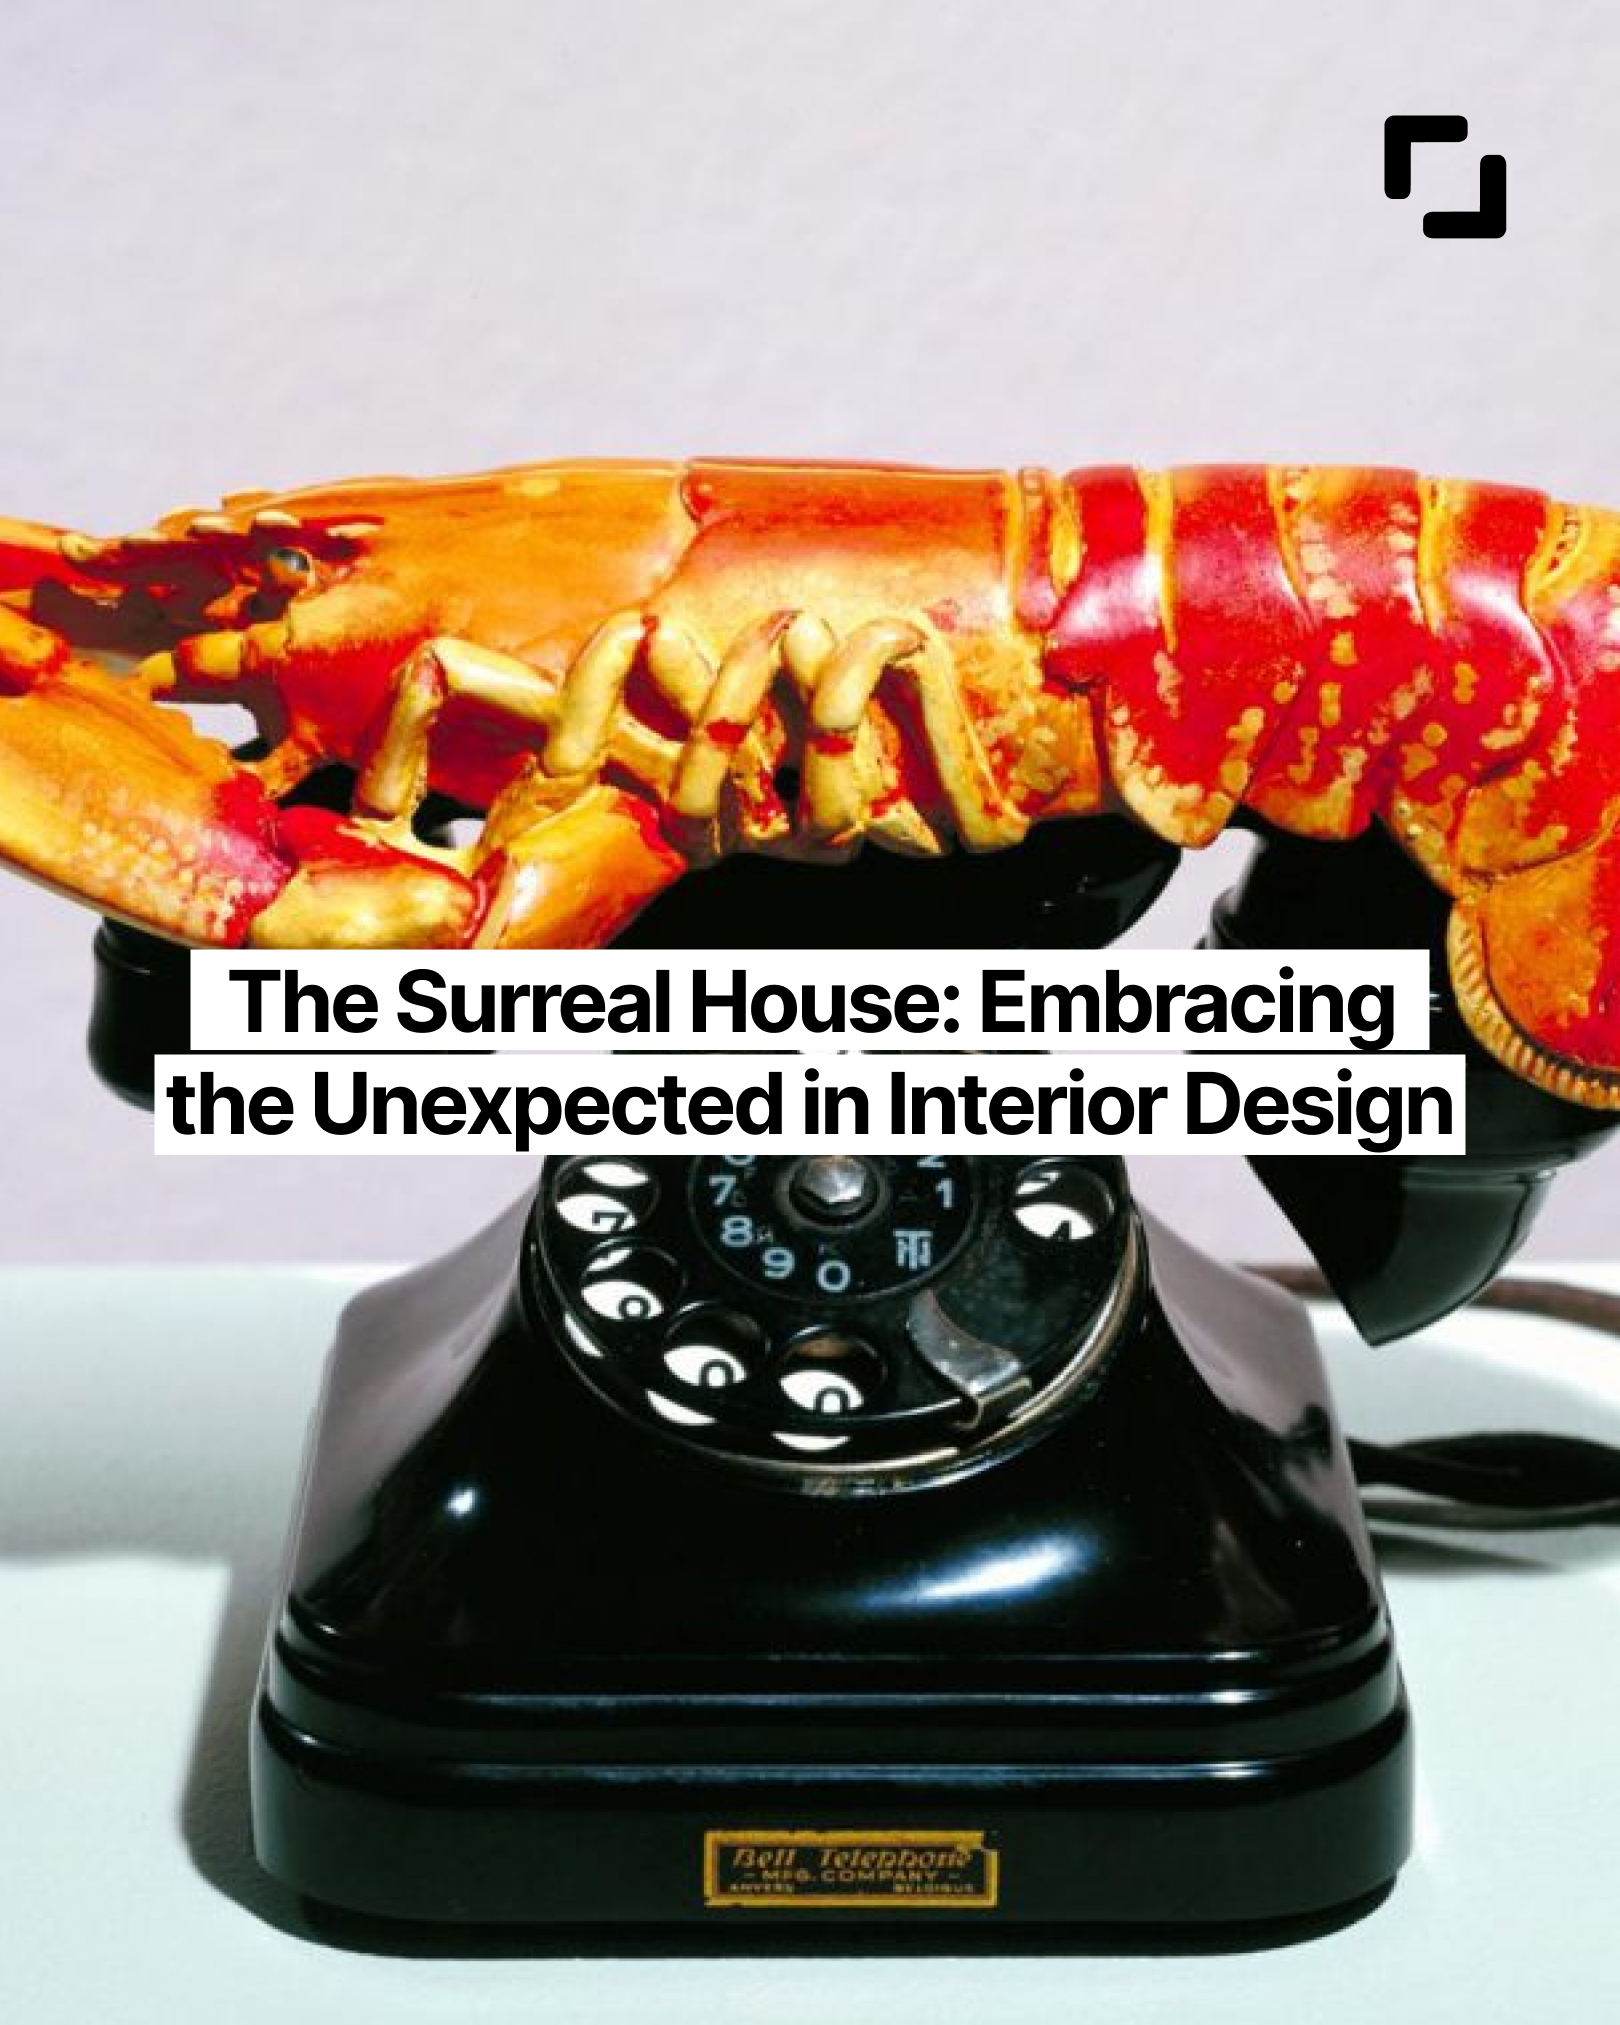 The Surreal House: Embracing the Unexpected in Interior Design